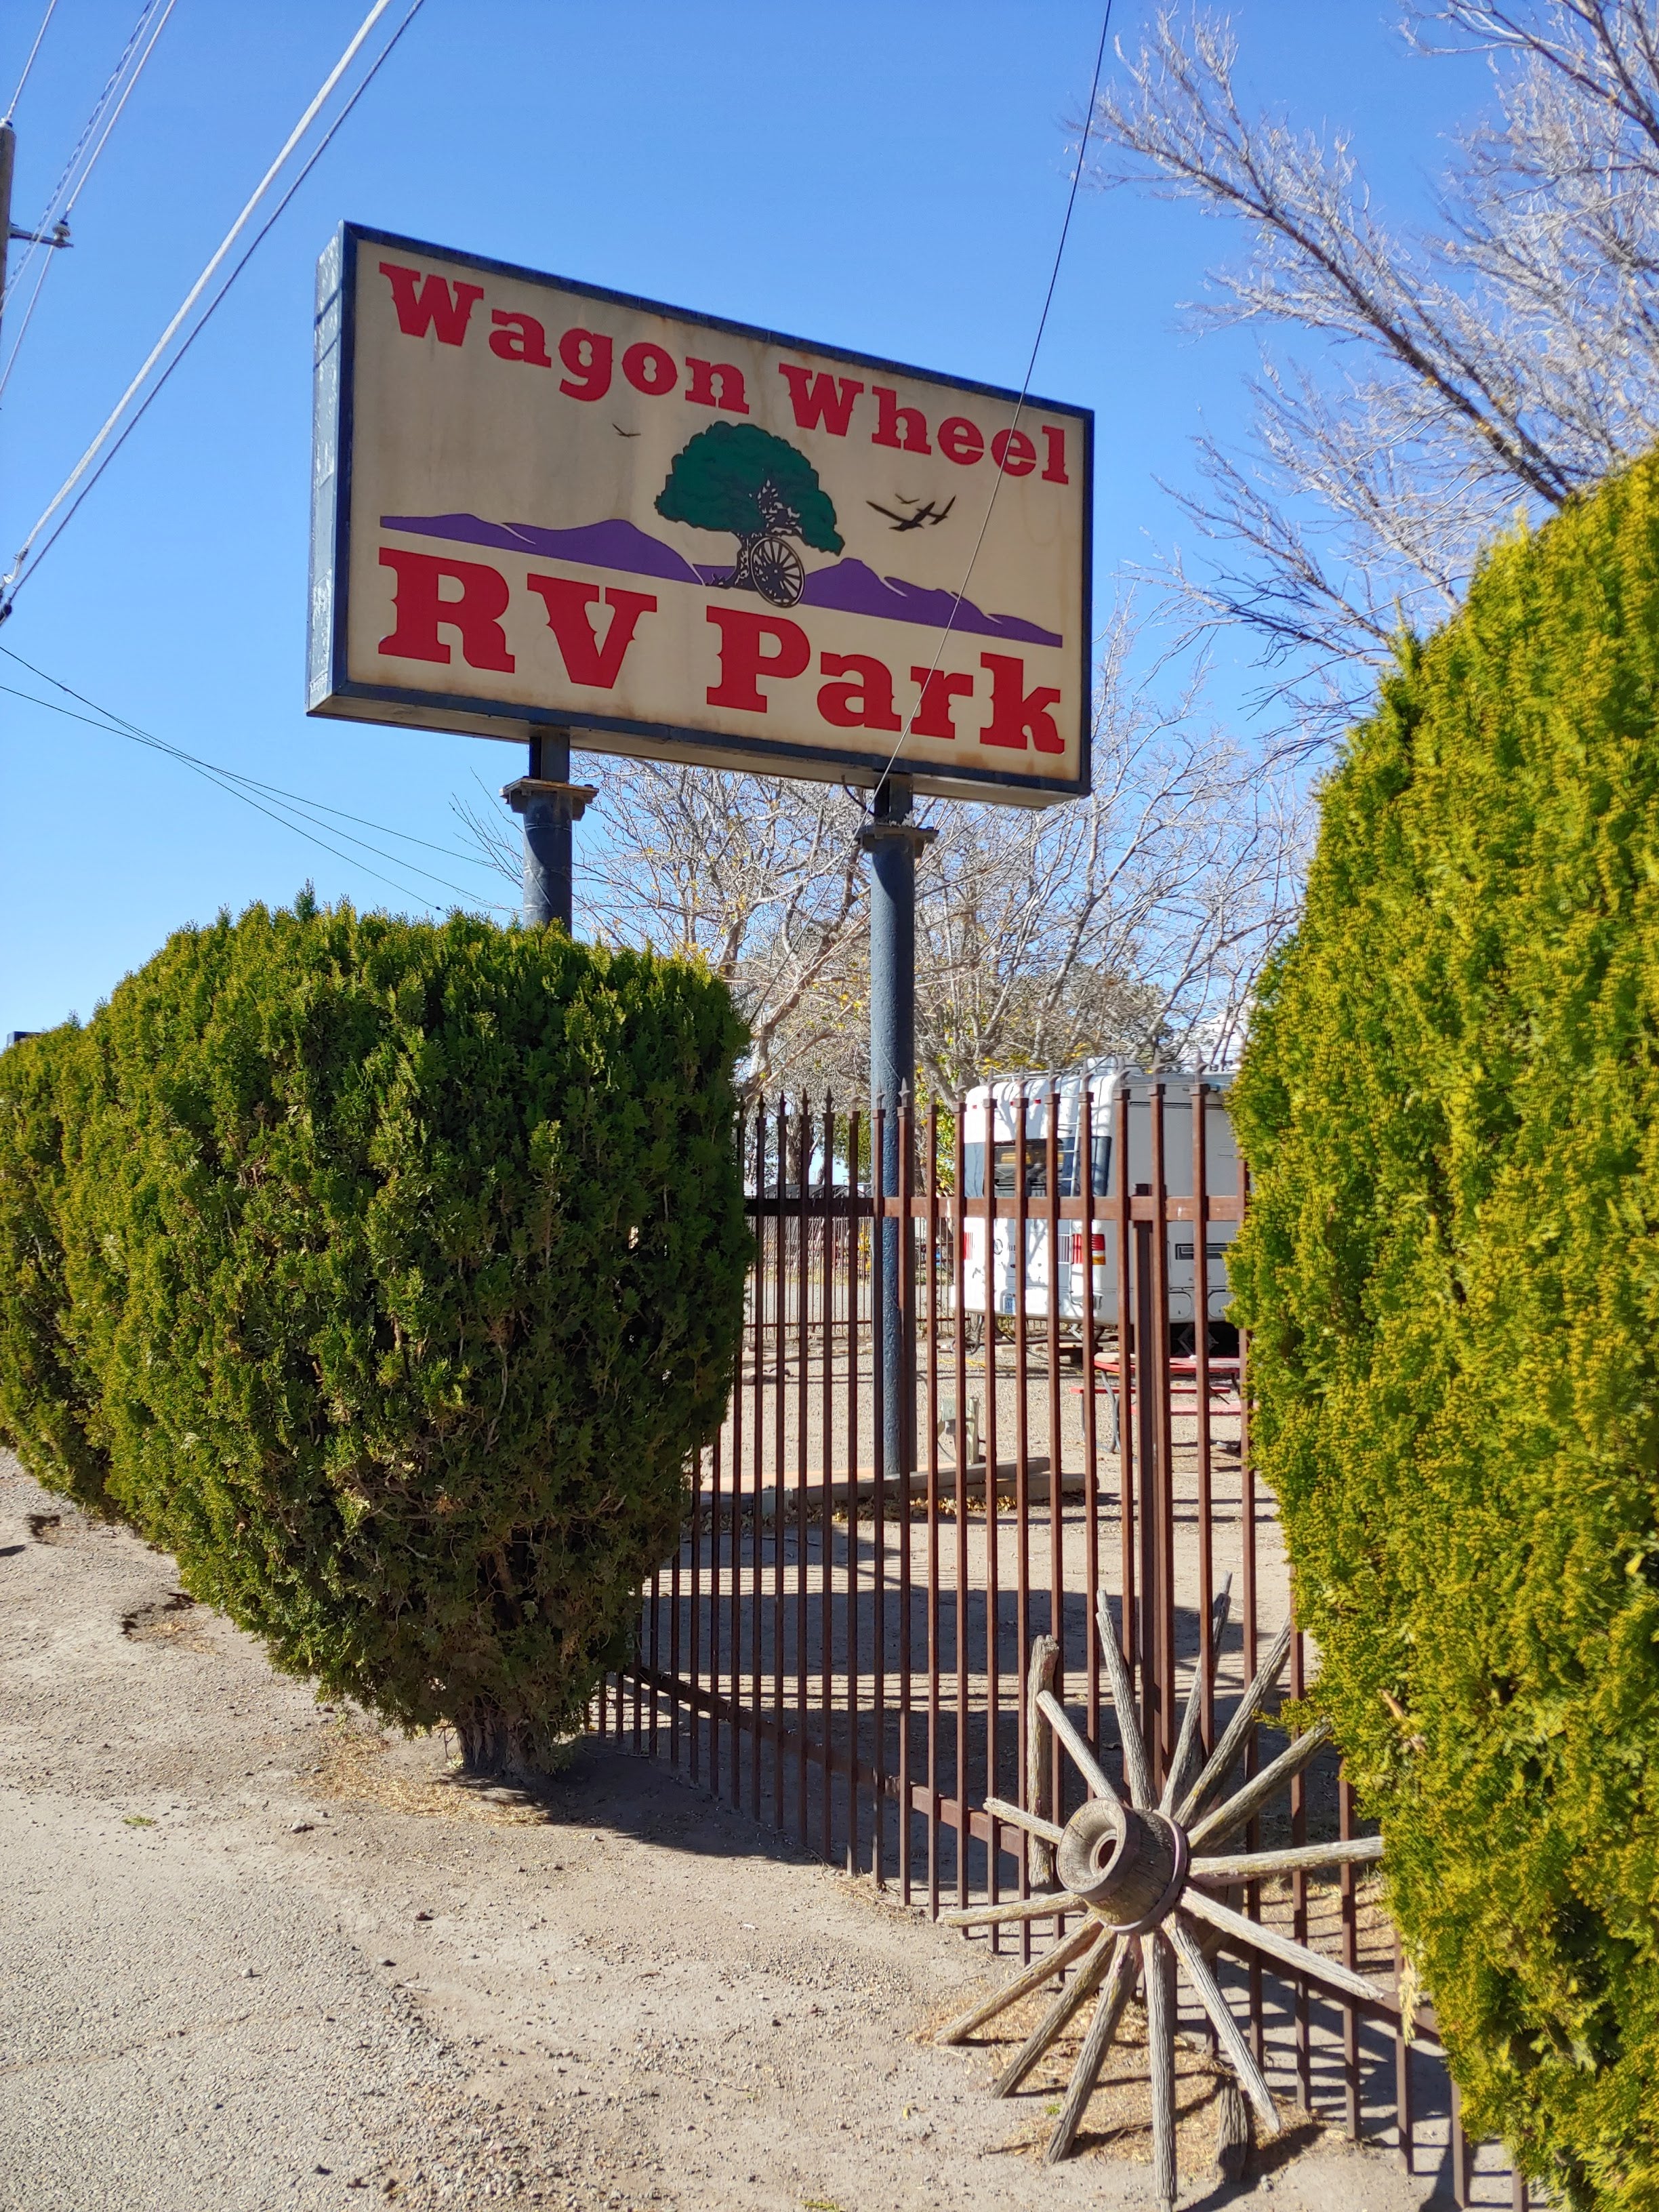 Camper submitted image from Wagon Wheel RV Park - 4